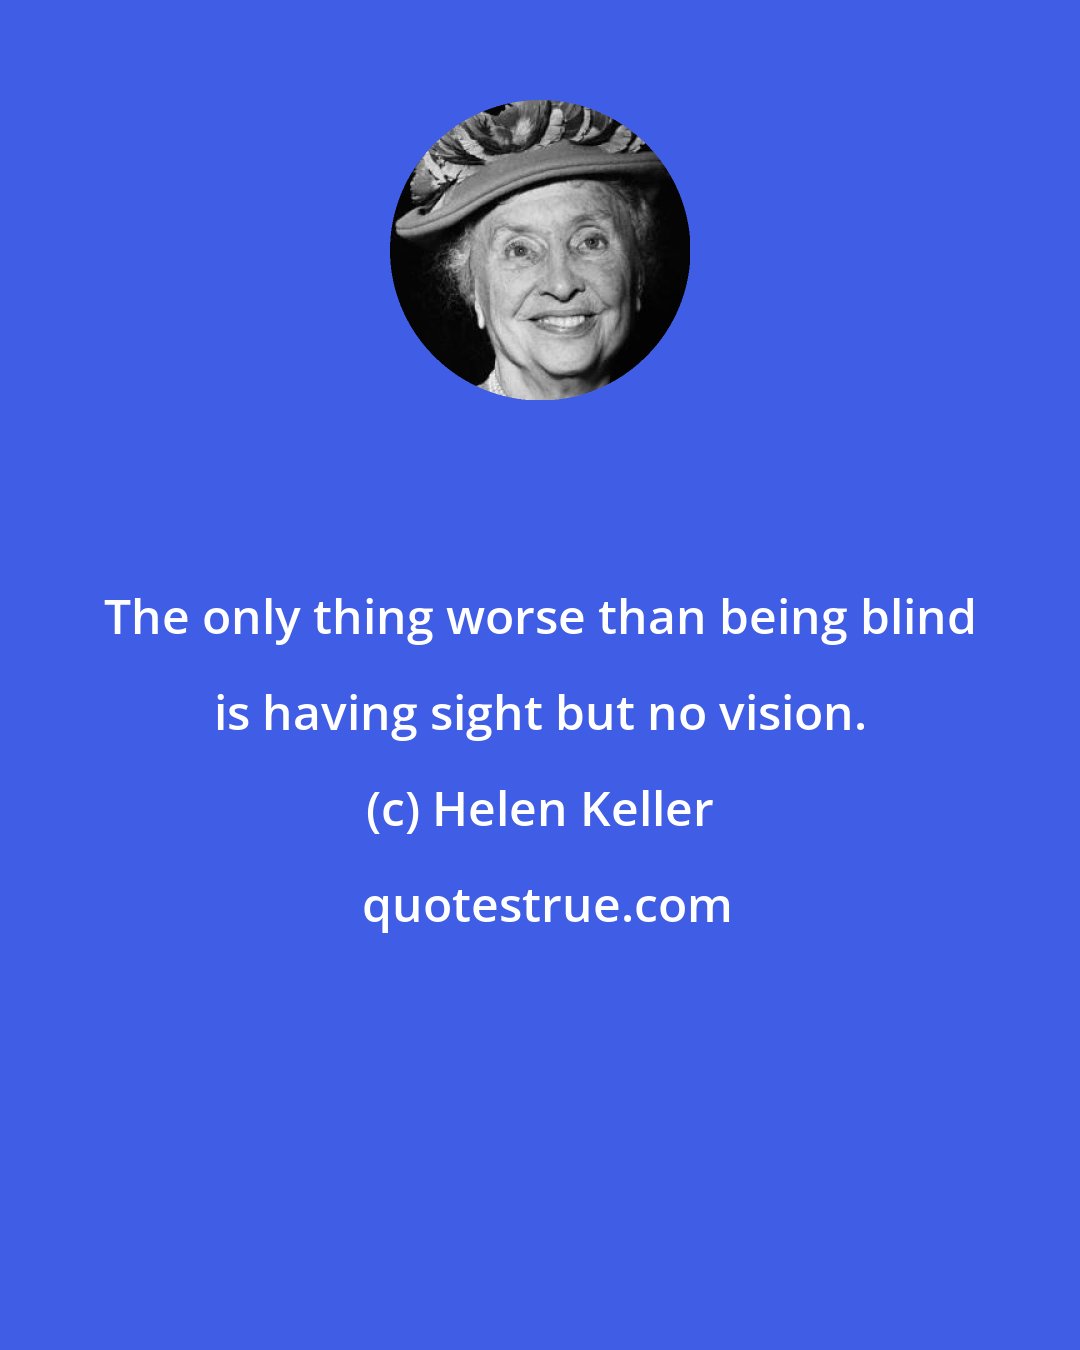 Helen Keller: The only thing worse than being blind is having sight but no vision.